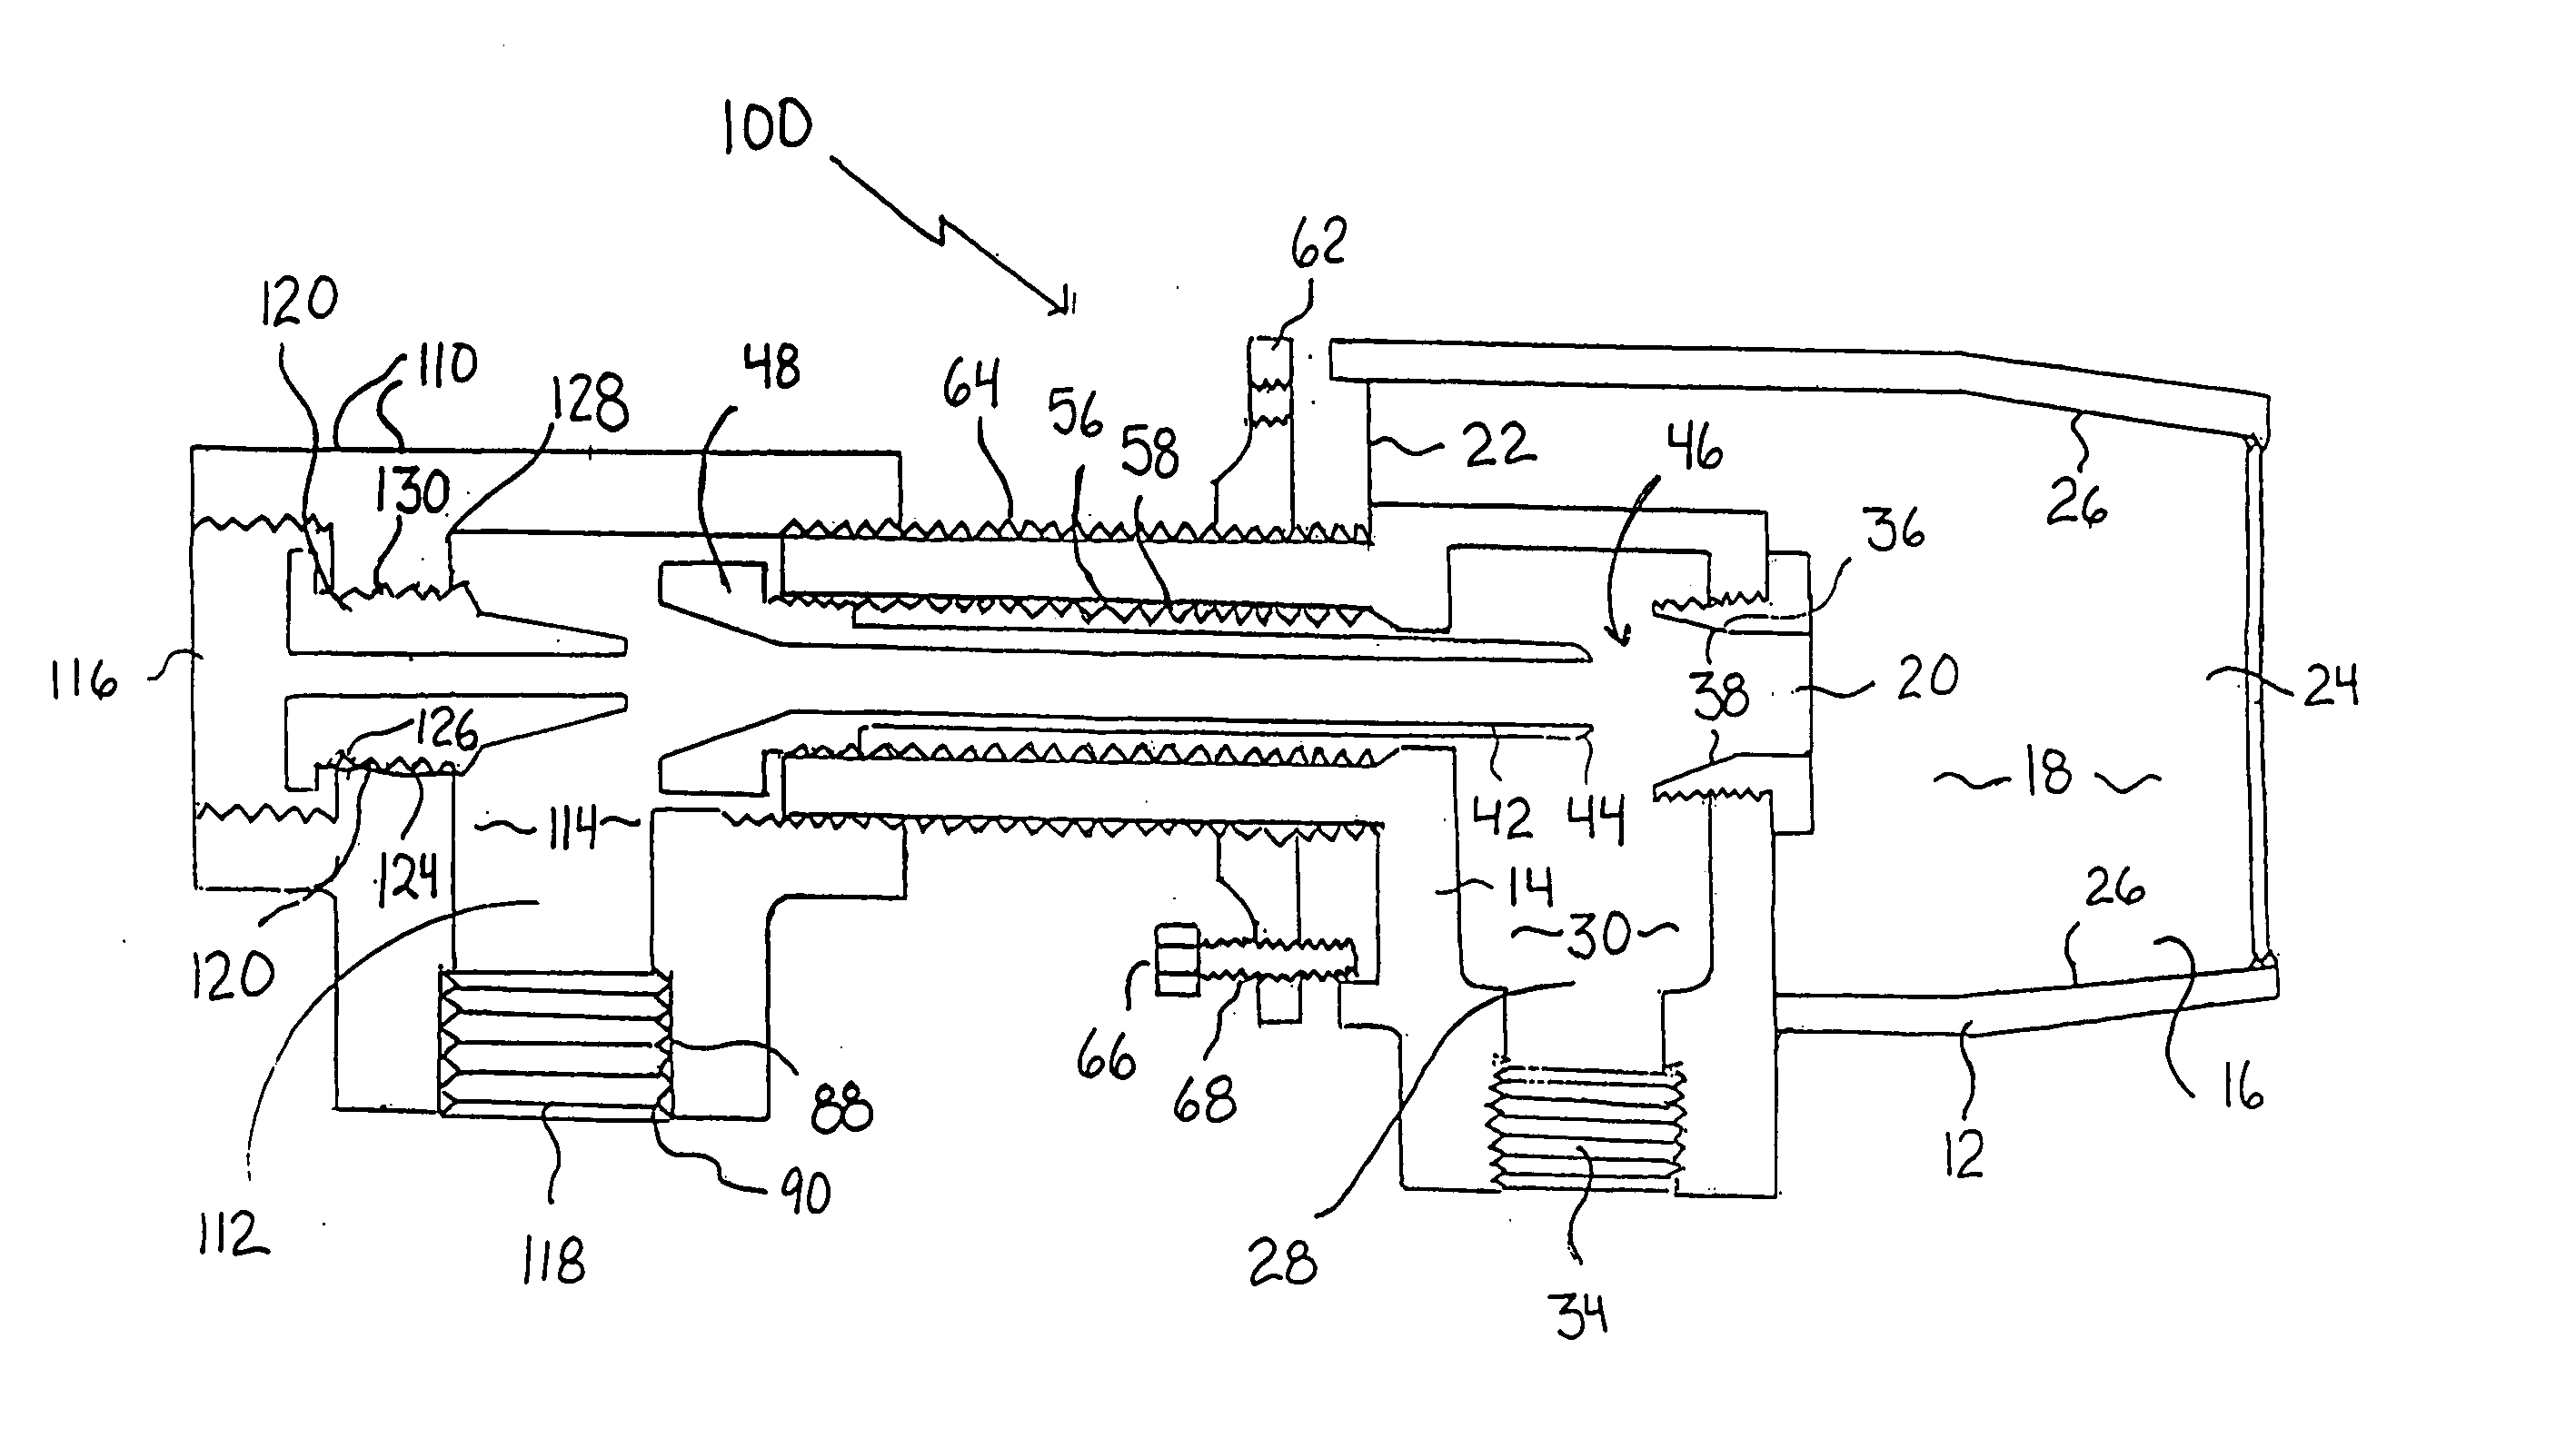 Burner fuel mixer head for concurrently burning two gaseous fuels